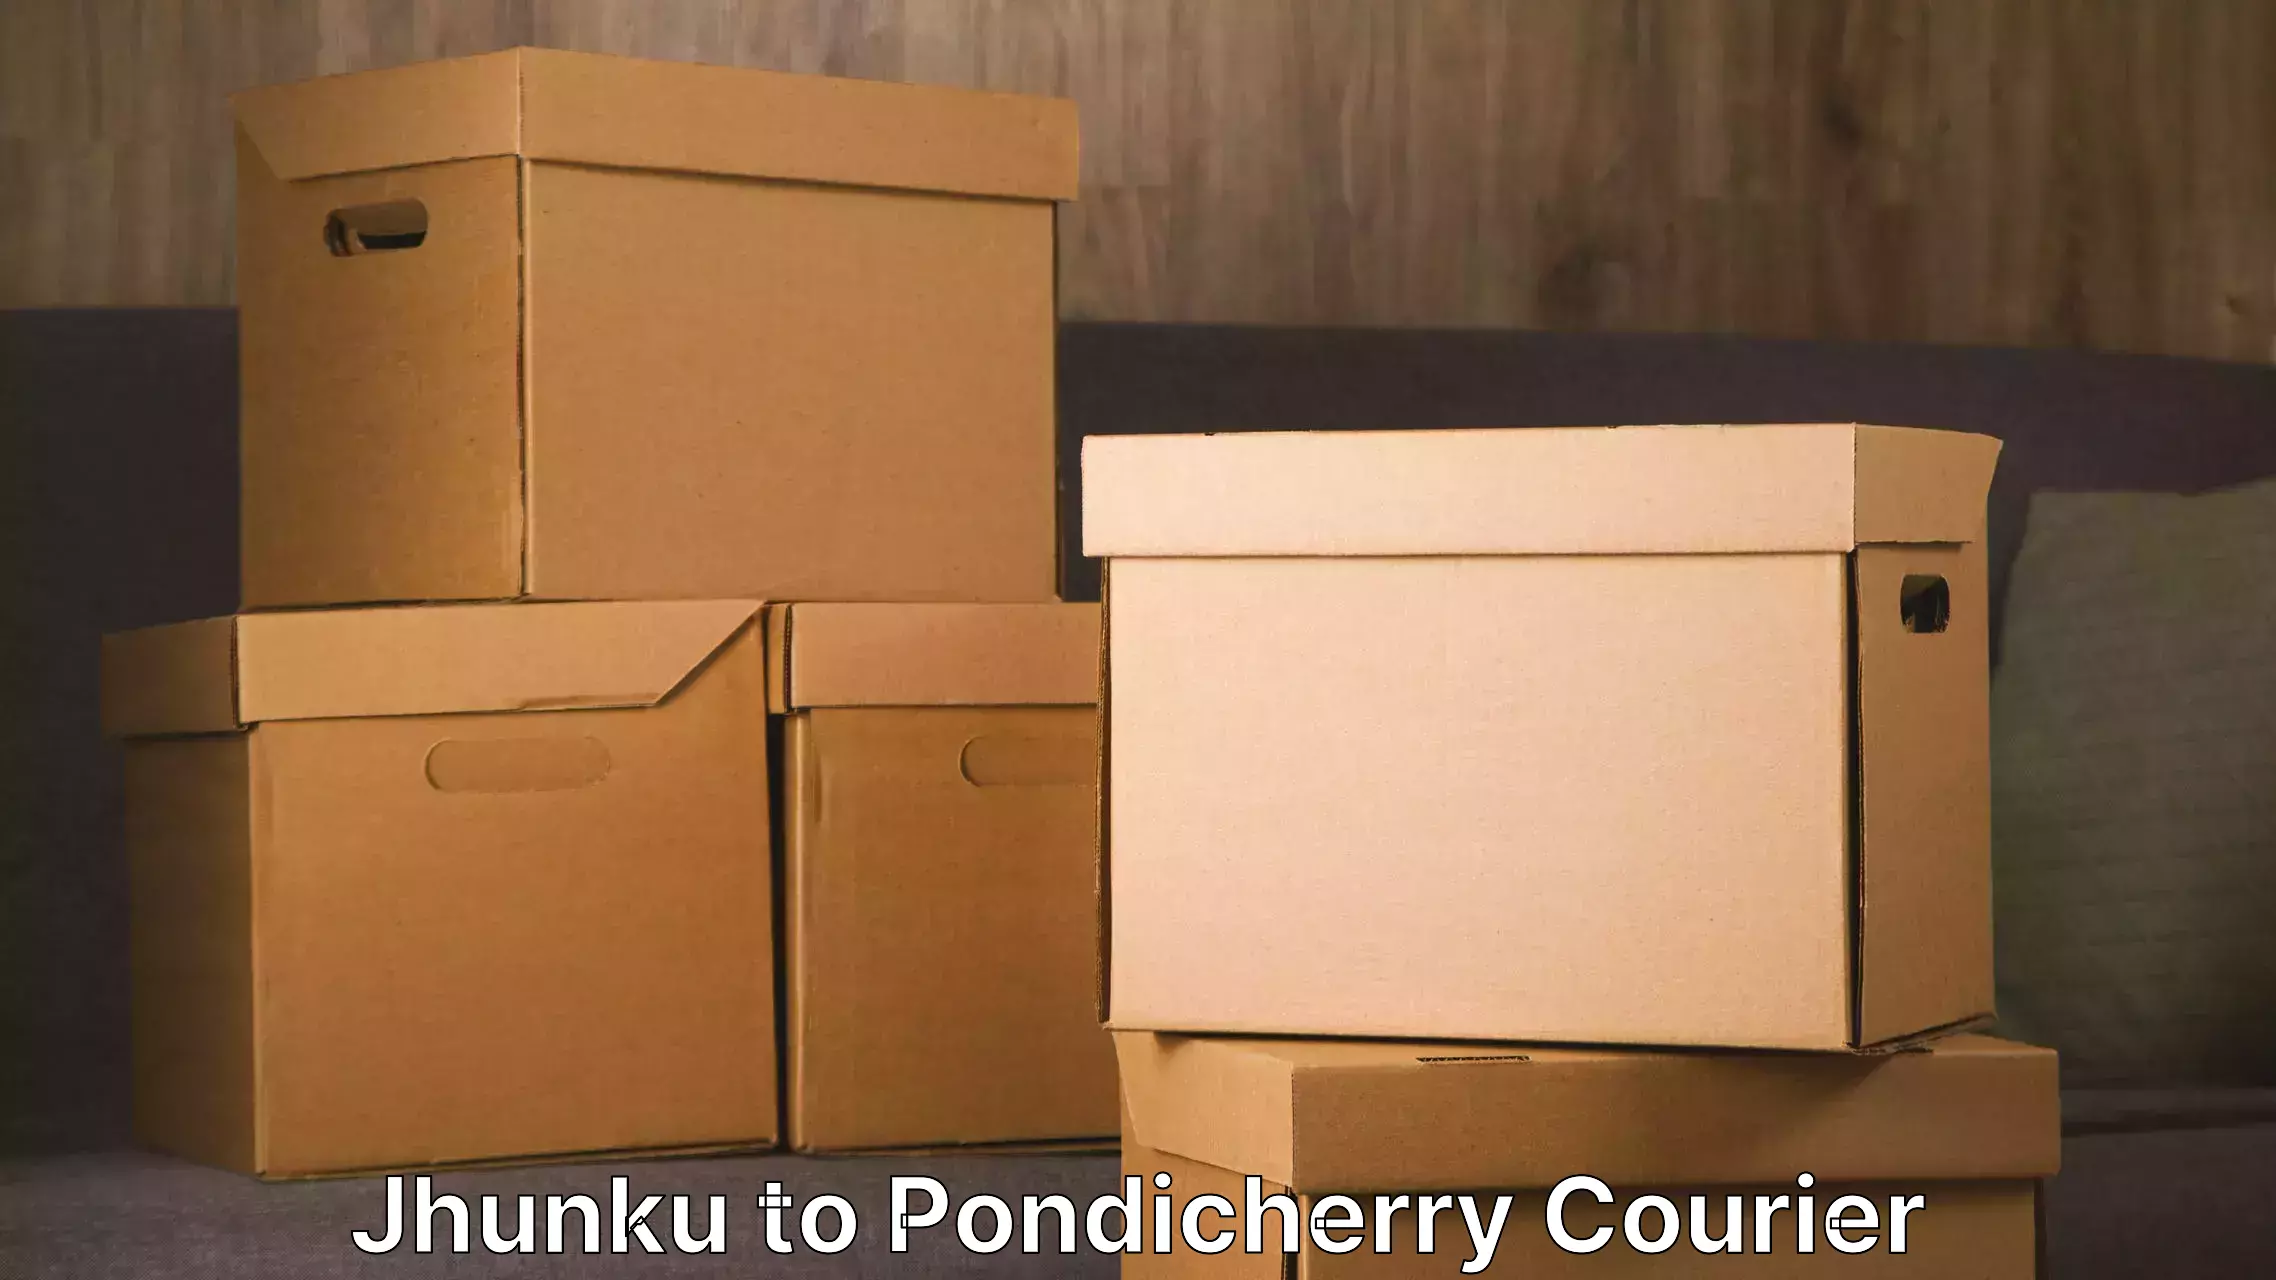 Trusted relocation experts Jhunku to Pondicherry